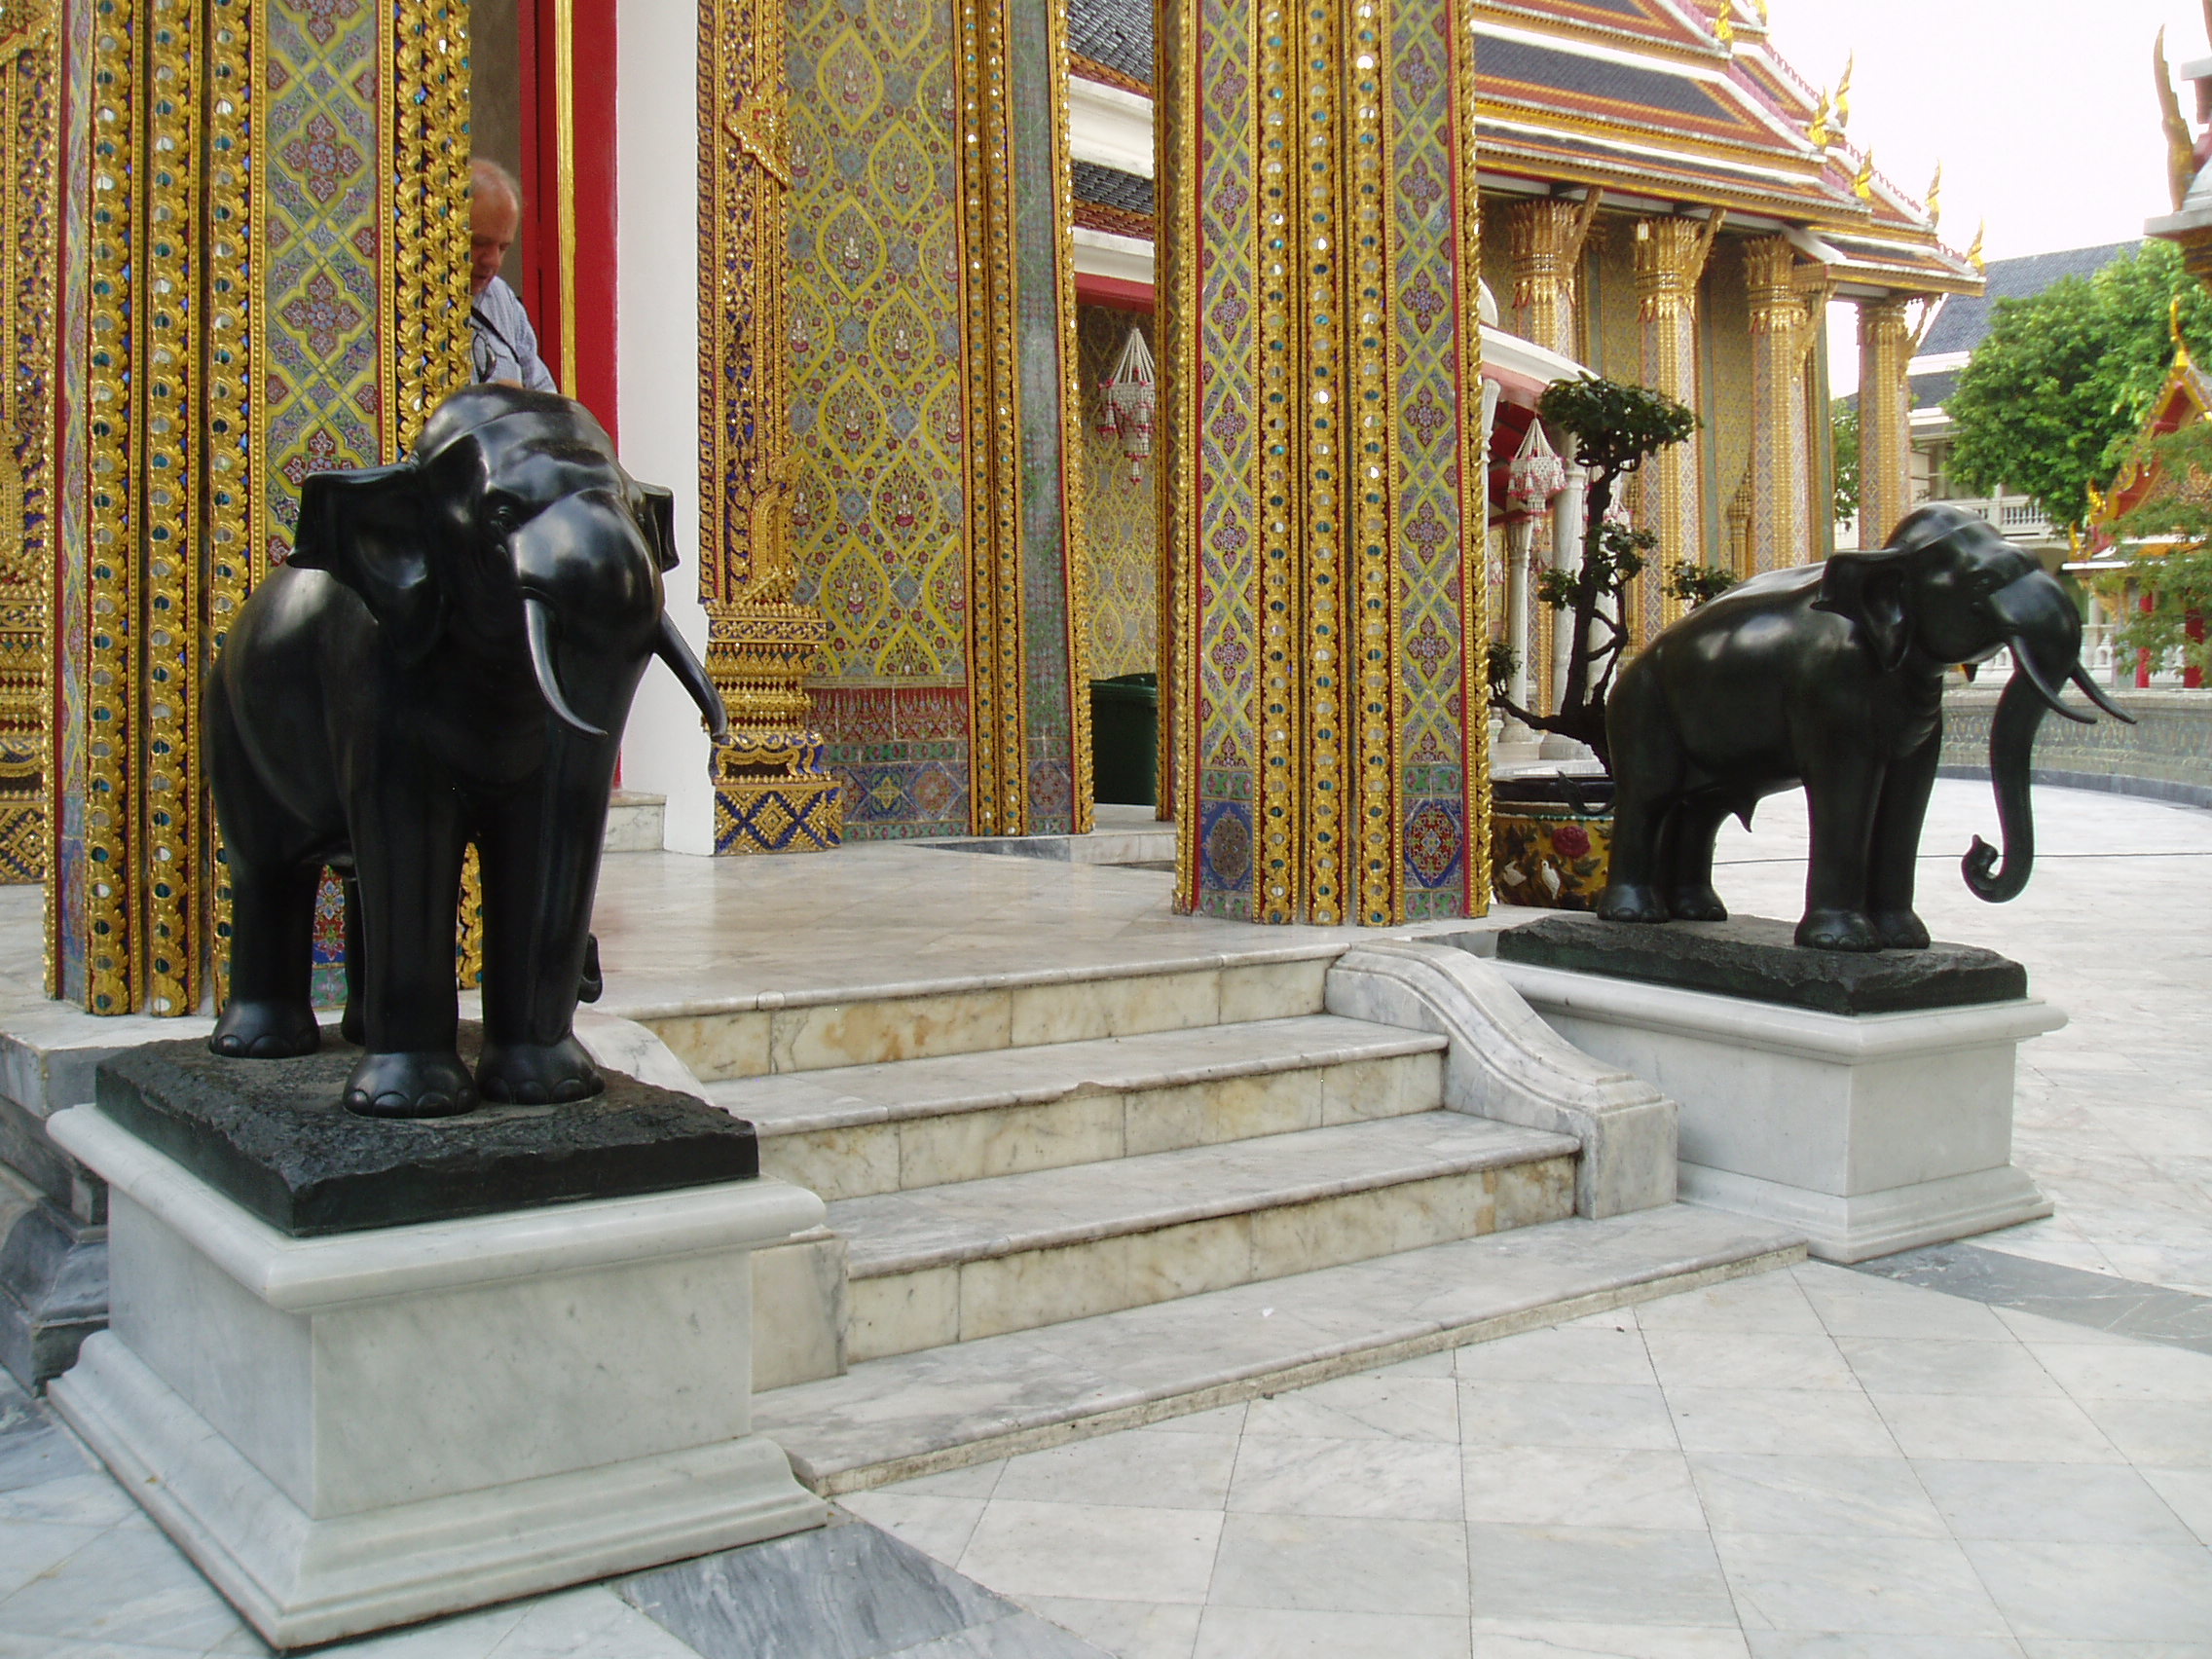 Elephants, Wat Ratchabophit, Bangkok Wat Ratchabophit is one of the most unusual temples in Bangkok; built in the latter half of the 19th century it shows marked European influence in certain areas, such as the neo-gothic interior of the main bot (prayer hall) and many of the monuments in the adjoining Royal Cemetery, that includes a domed classical style tower and pinnacled gothic steeples amongst more traditional Thai and Khmer style structures. The centrepiece of the Temple is the huge tile-covered stupa that grows from the heart of the complex and is surrounded by a tight circular courtyard. The surrounding structures are richly decorated and gilded with typical Thai richness. The entrance gates to the temple compound have carved and painted door panels with bizarre figures that appear to be 'farang' (foreign/European) guards holding rifles! en.wikipedia.org/wiki/Wat_Ratchabophit